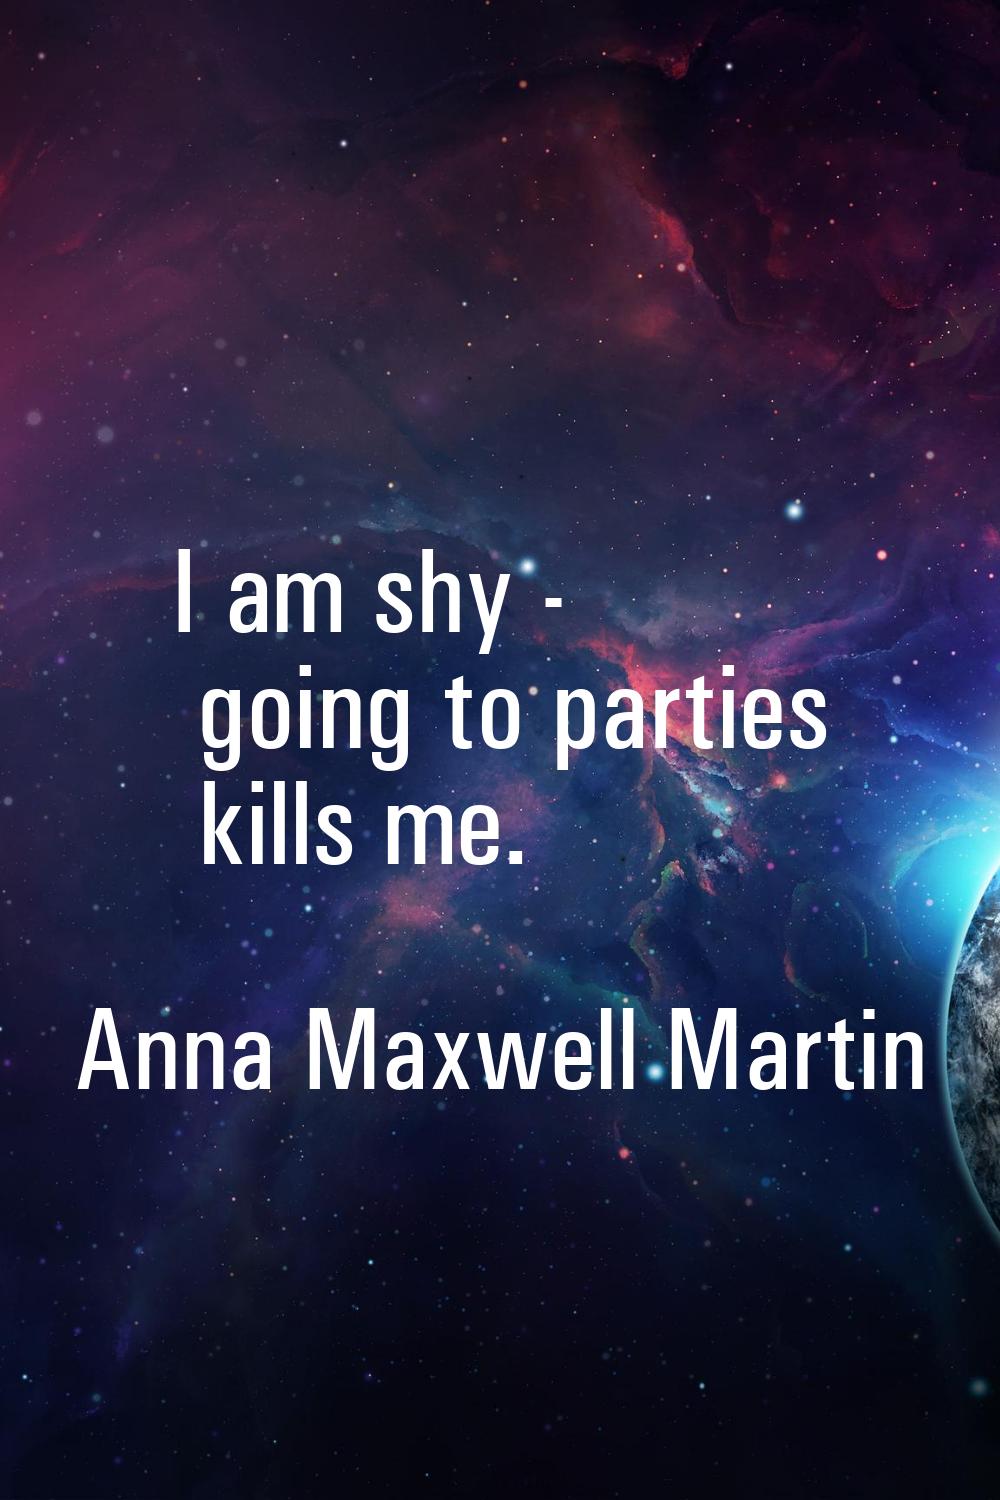 I am shy - going to parties kills me.